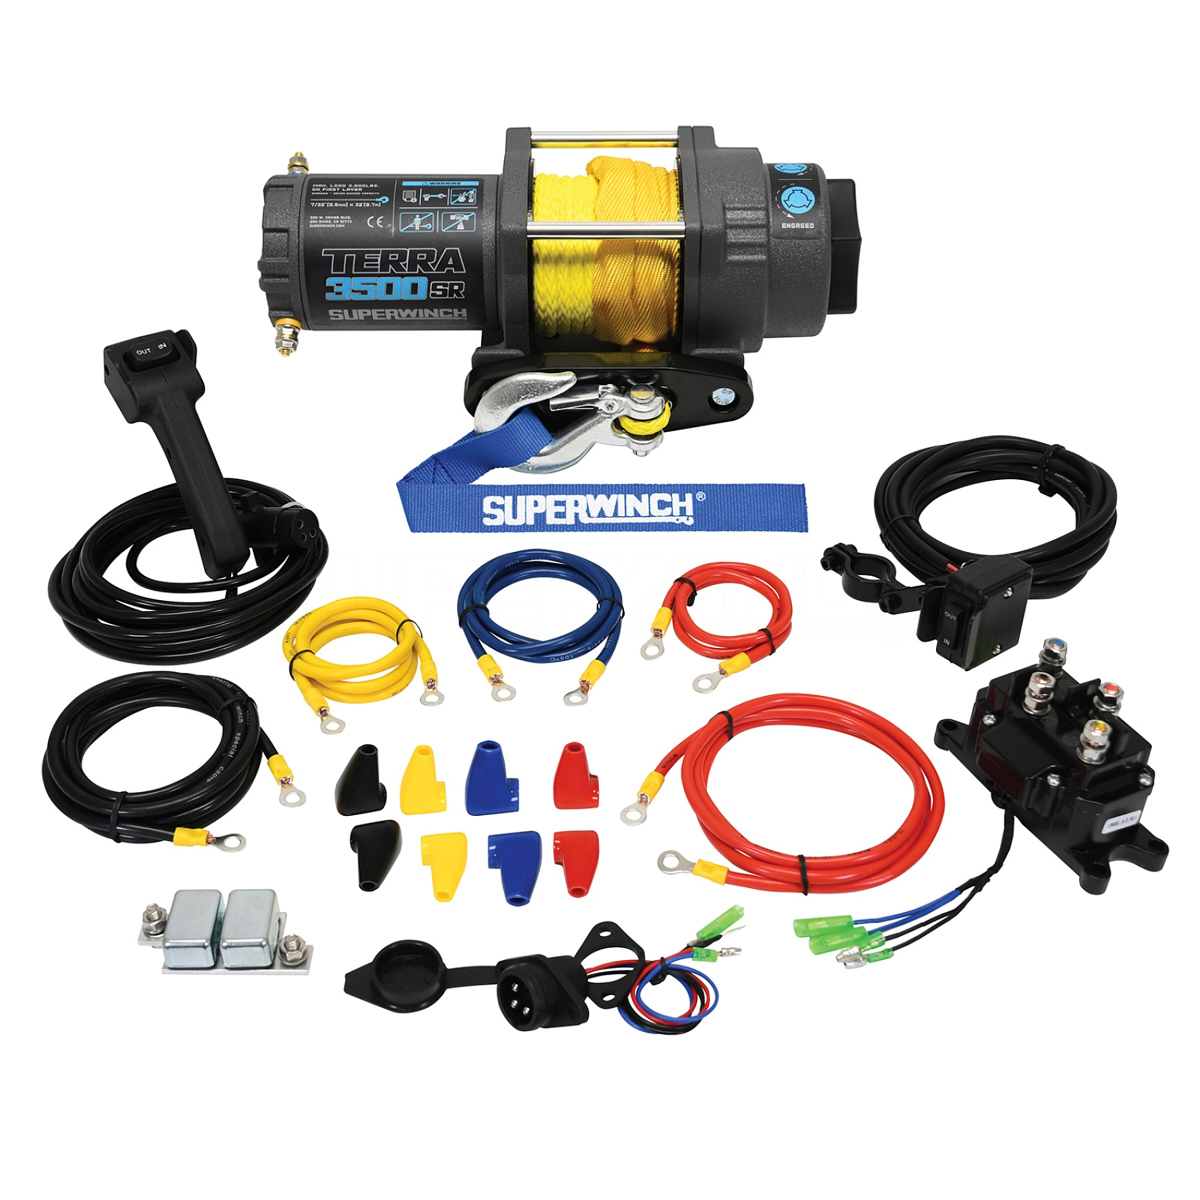 SuperWinch 1135270 Winch, Terra, 3500 lb Capacity, Hawse Fairlead, 10 ft Remote, 3/16 in x 32 ft Synthetic Rope, 12V, Kit